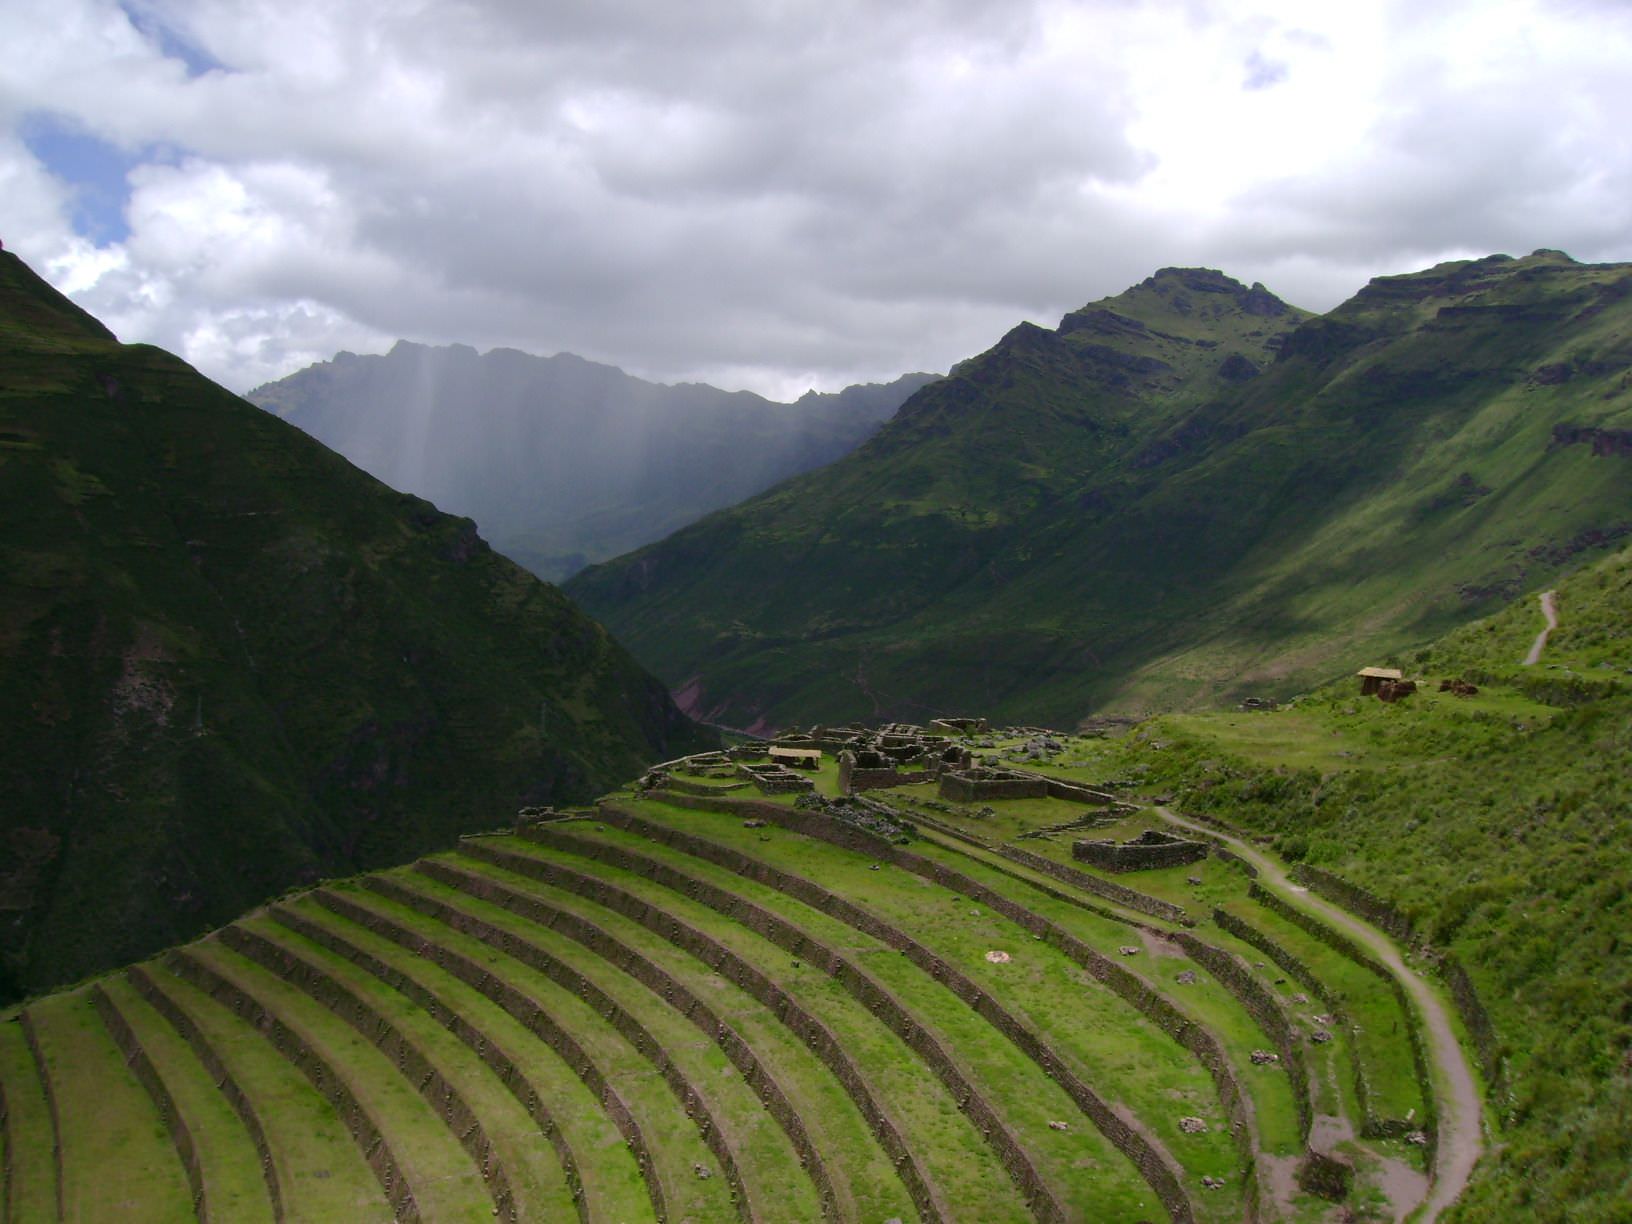 Rain-fed Agriculture Thrived Despite Climate Degradation in the pre-Hispanic Arid Andes